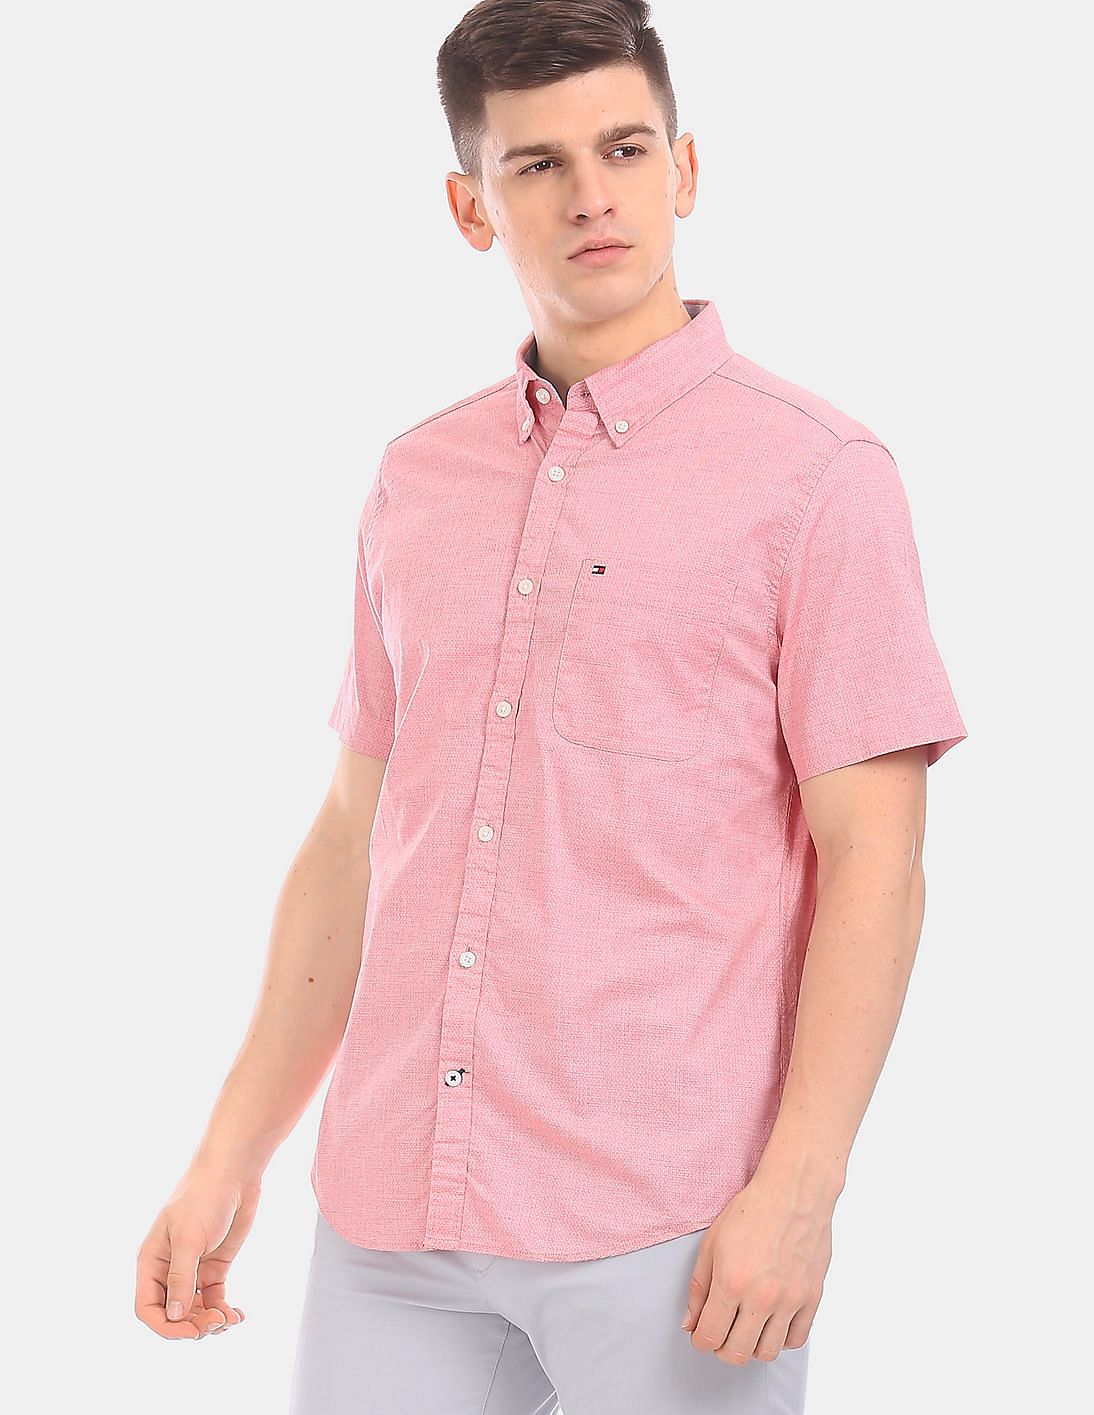 Buy Tommy Hilfiger Men Pink Button Down Patterned Casual Shirt - NNNOW.com